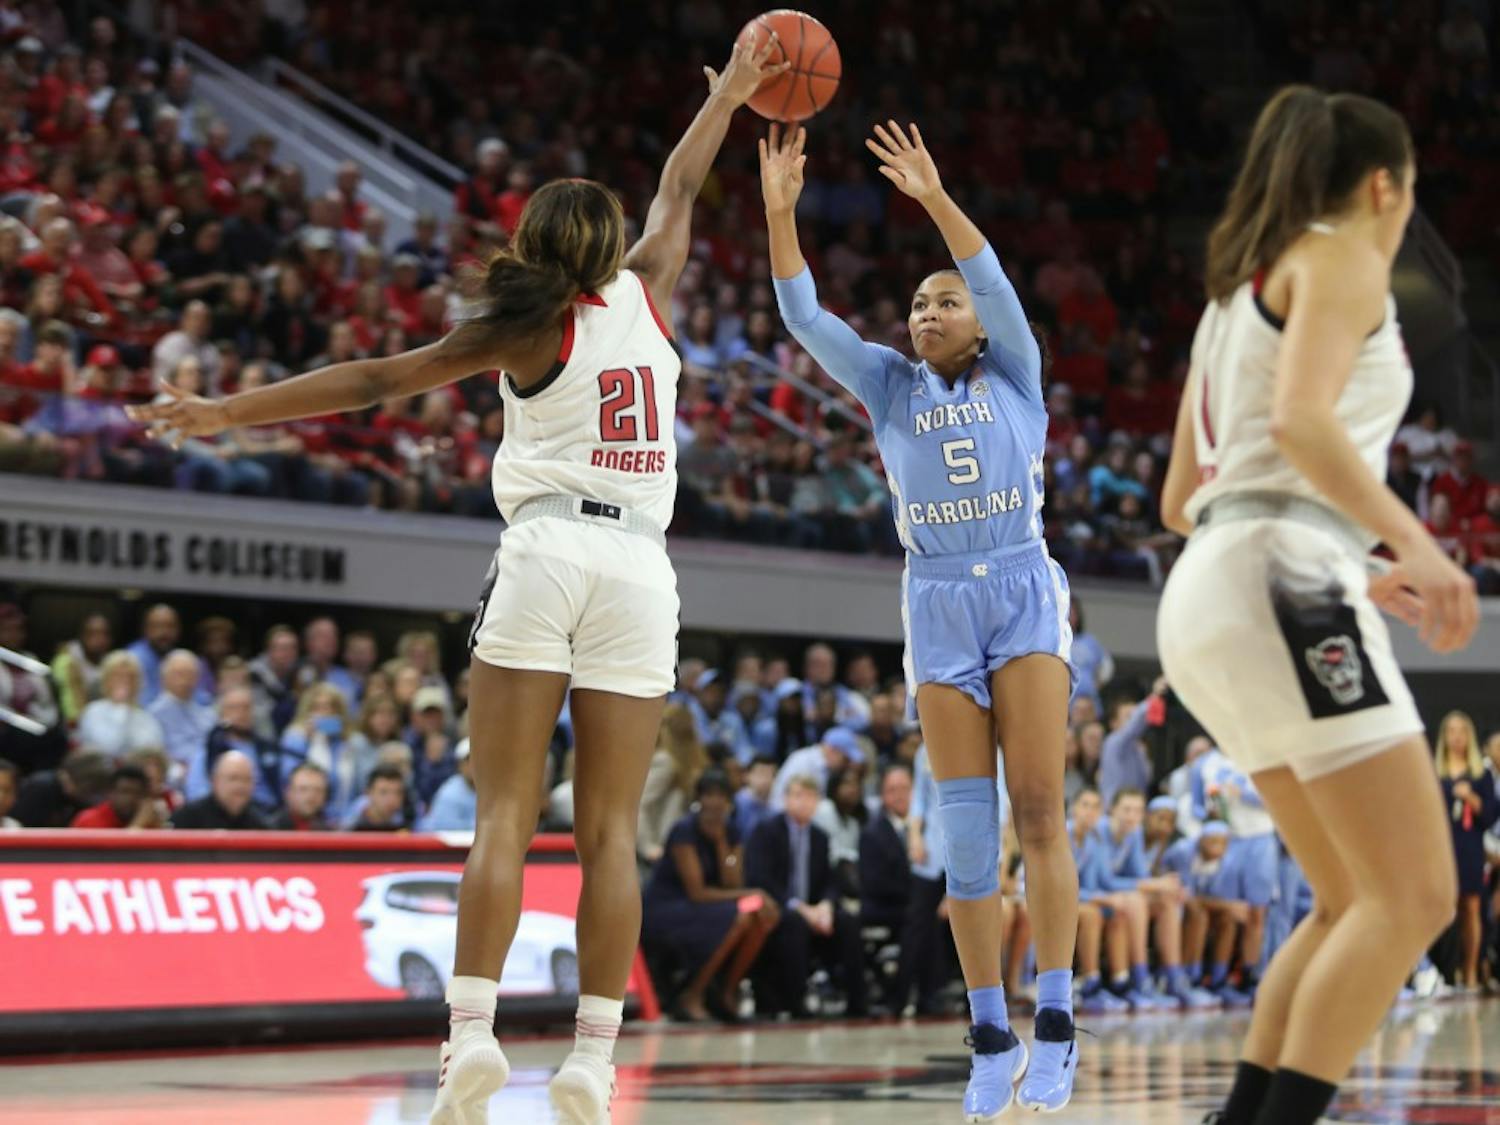 Tar Heel redshirt junior guard Stephanie Watts (5) attempts a shot against Wolfpack Senior Forward DD Rogers (22) during the UNC's 64-51 win against NC State at Reynolds Coliseum on Sunday, Feb. 3, 2019 in Raleigh, NC. The Tar Heels Women's Basketball Team (14-9) handed the Wolfpack (21-1) their first loss of the season.